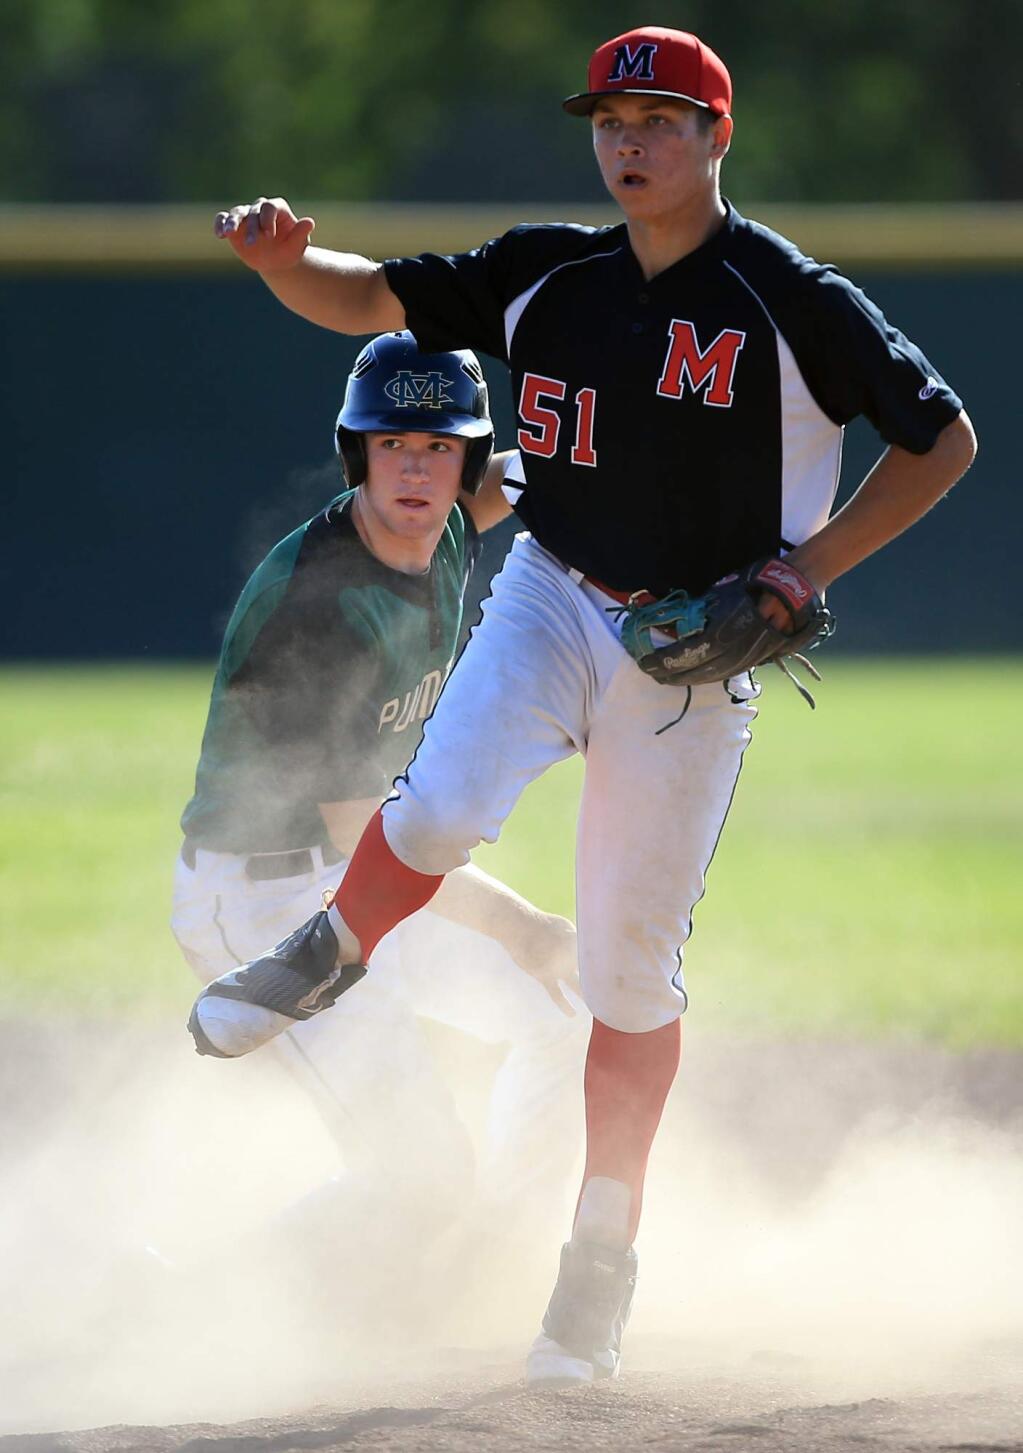 Montgomery's Cody Lyons attempts to complete a double play past the sliding Nick Quarles of Maria Carrillo, Wednesday May 18, 2016 at Maria Carrillo High School in Santa Rosa. (Kent Porter / Press Democrat) 2016